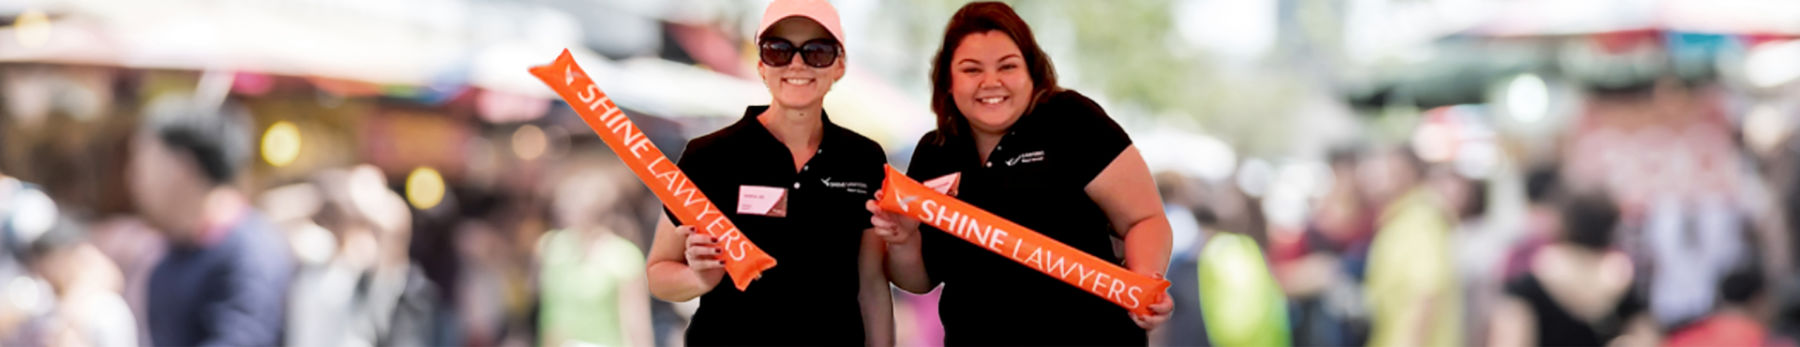 Shine Lawyers | In the community